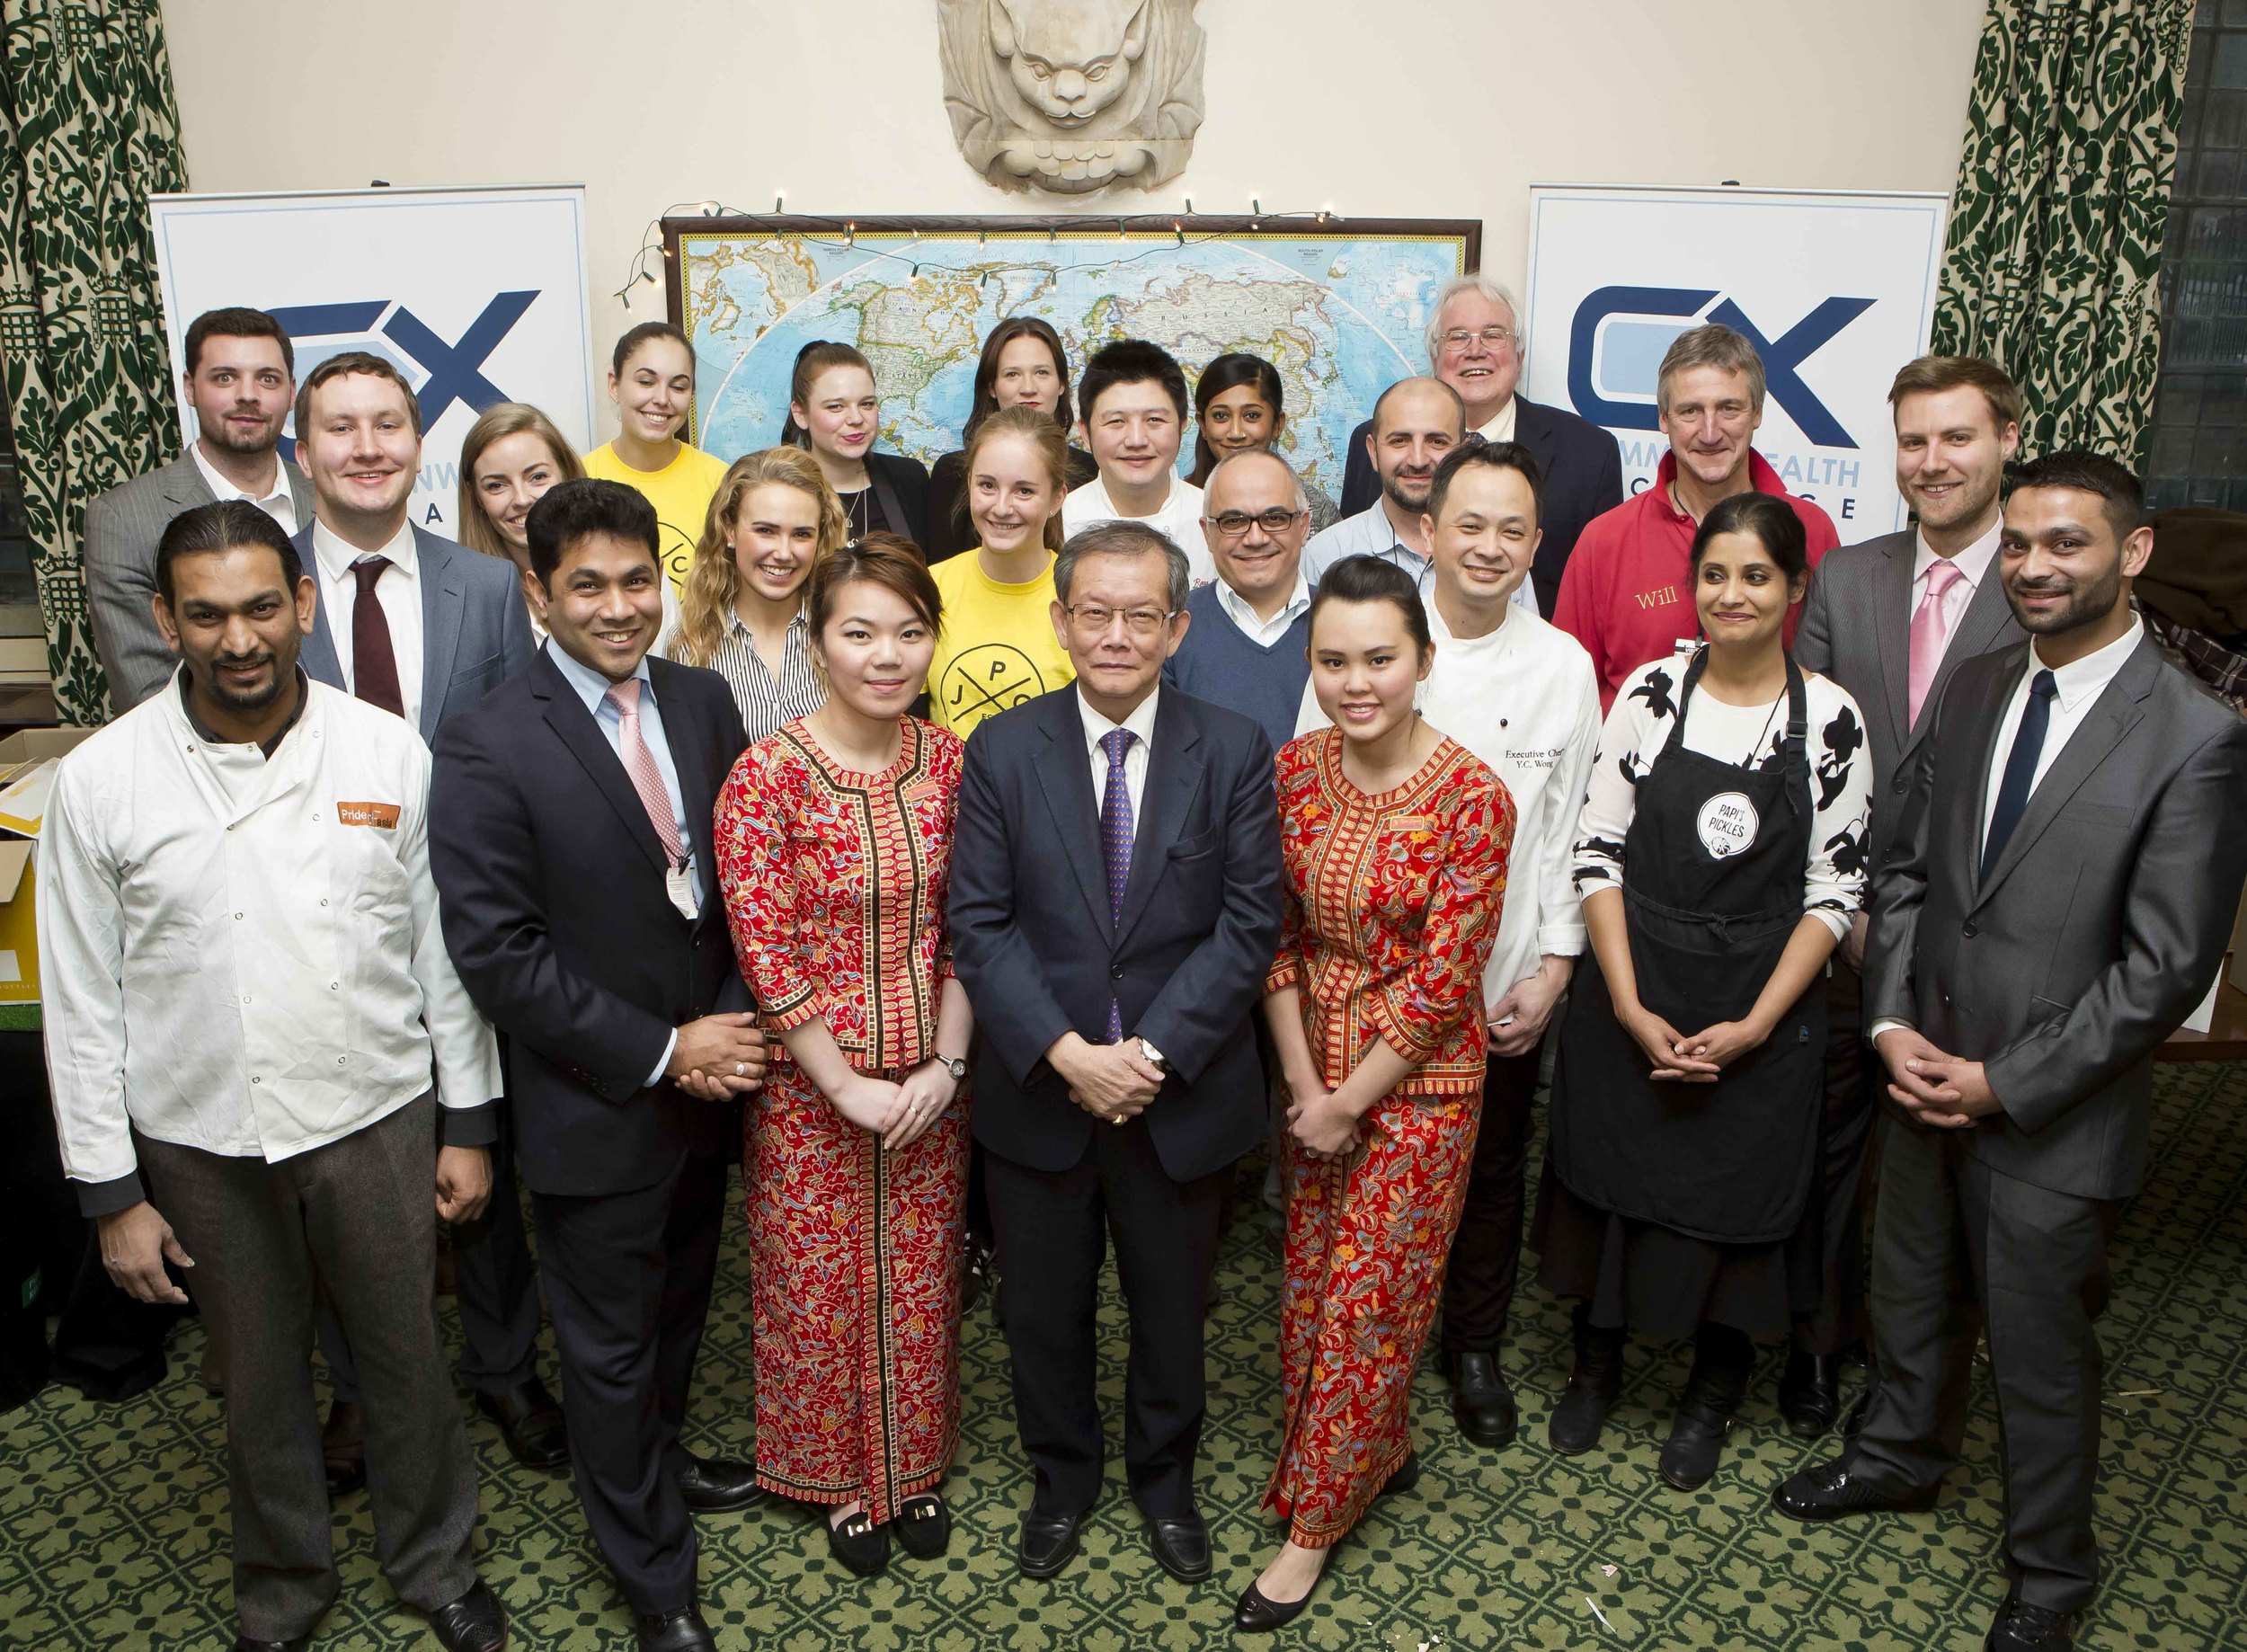 Commonwealth Food & Drink Festival in Parliament - Dec 2014